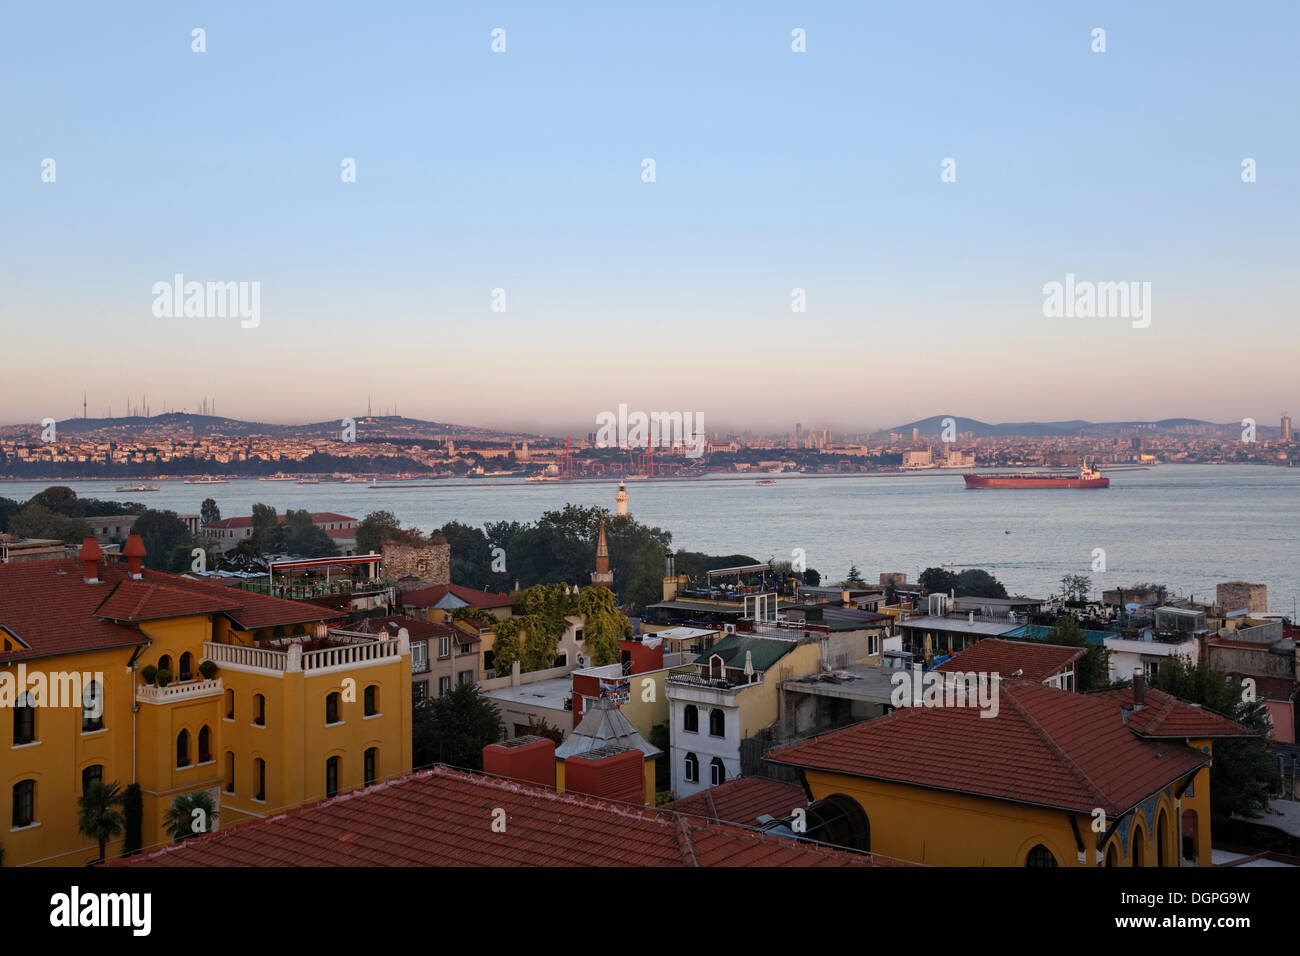 View from Old City Sultanahmet across Bosphorus towards the Asian side with Uskudar and Kadikoy, Istanbul, Turkey, Europe Stock Photo